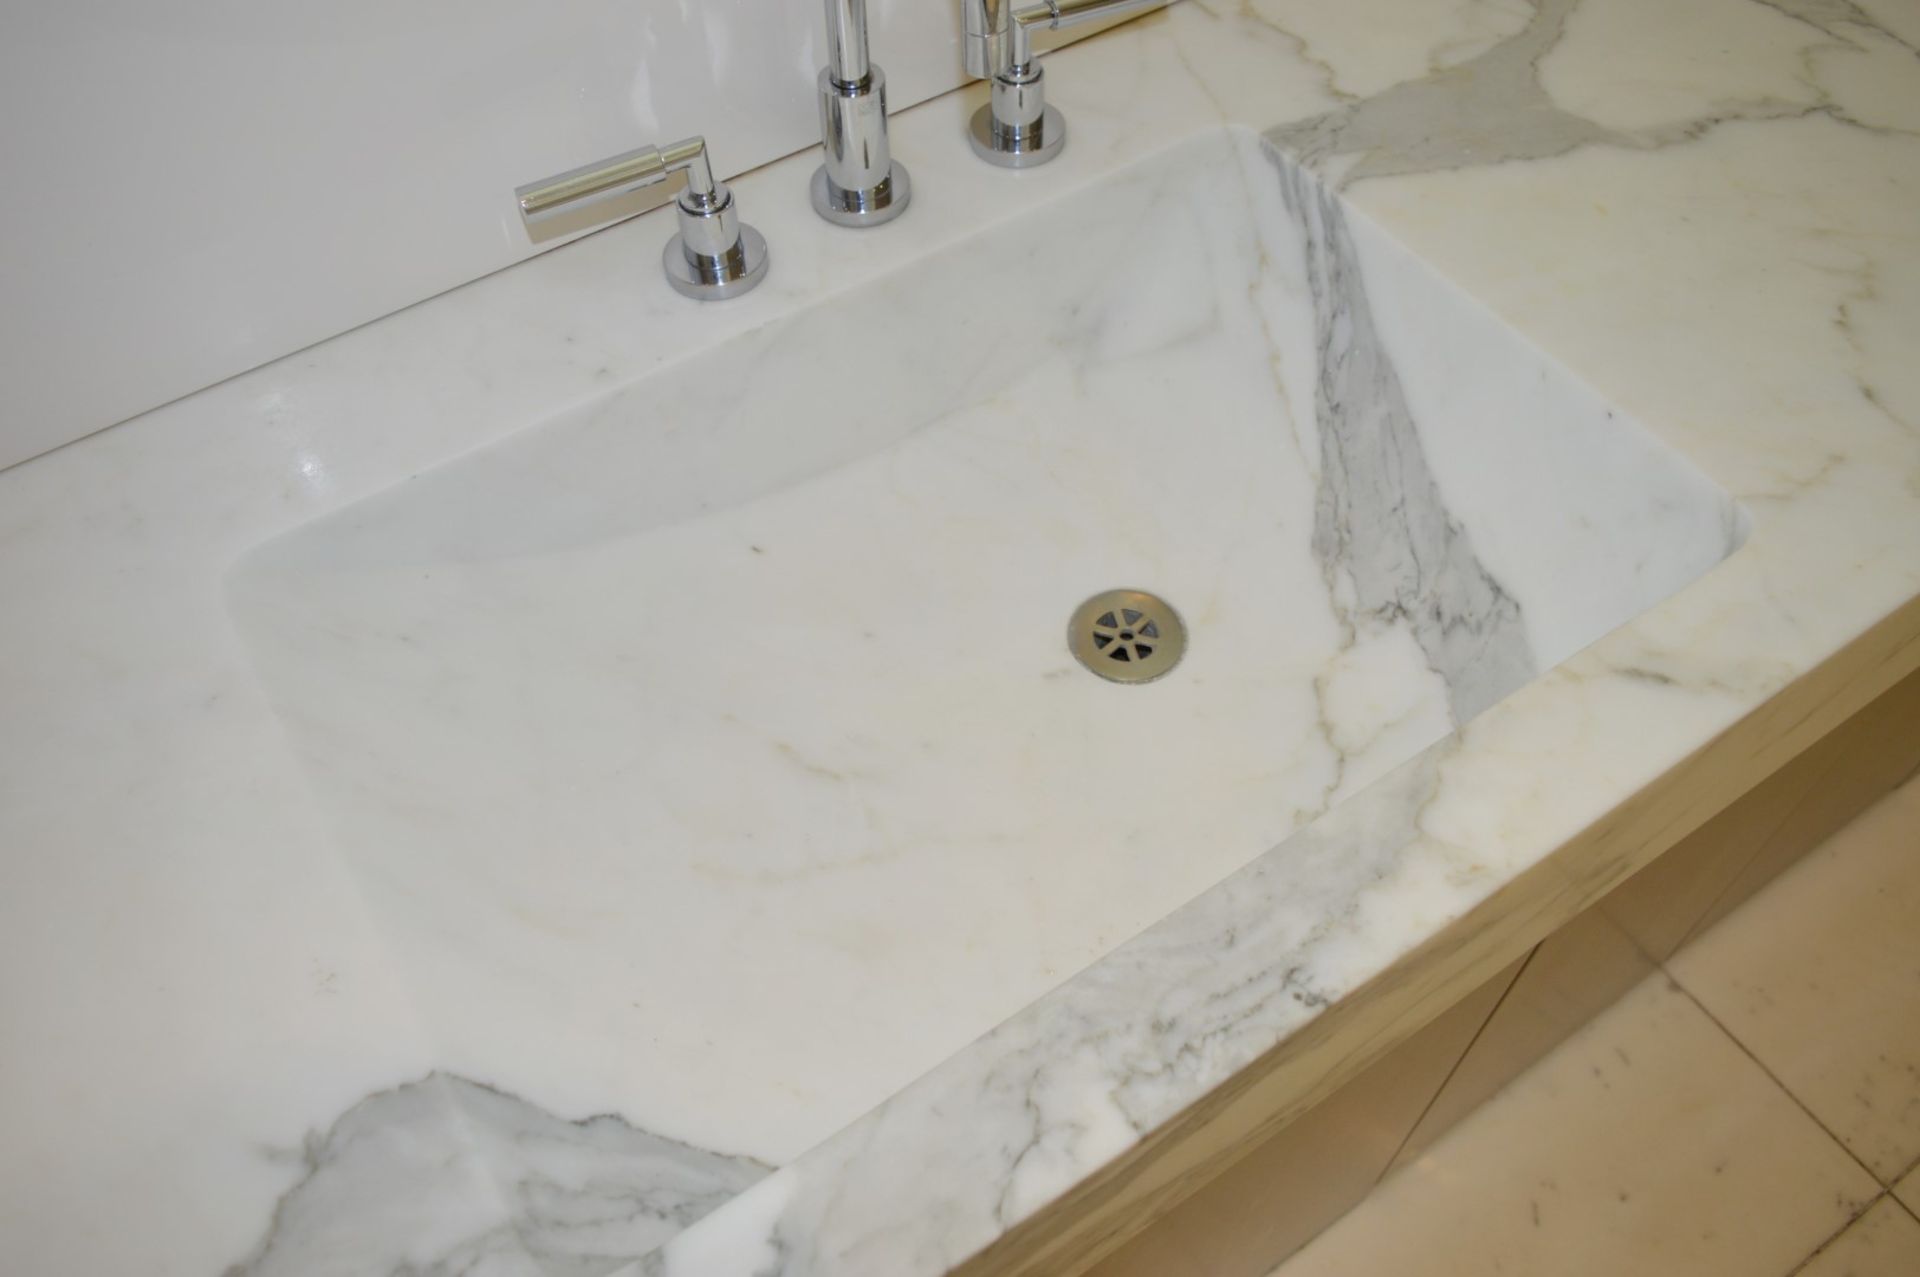 1 x Bespoke His & Hers Marble Bathroom Vanity Unit - Exquisite 7ft Twin Marble Sink Basin With Two - Image 10 of 25